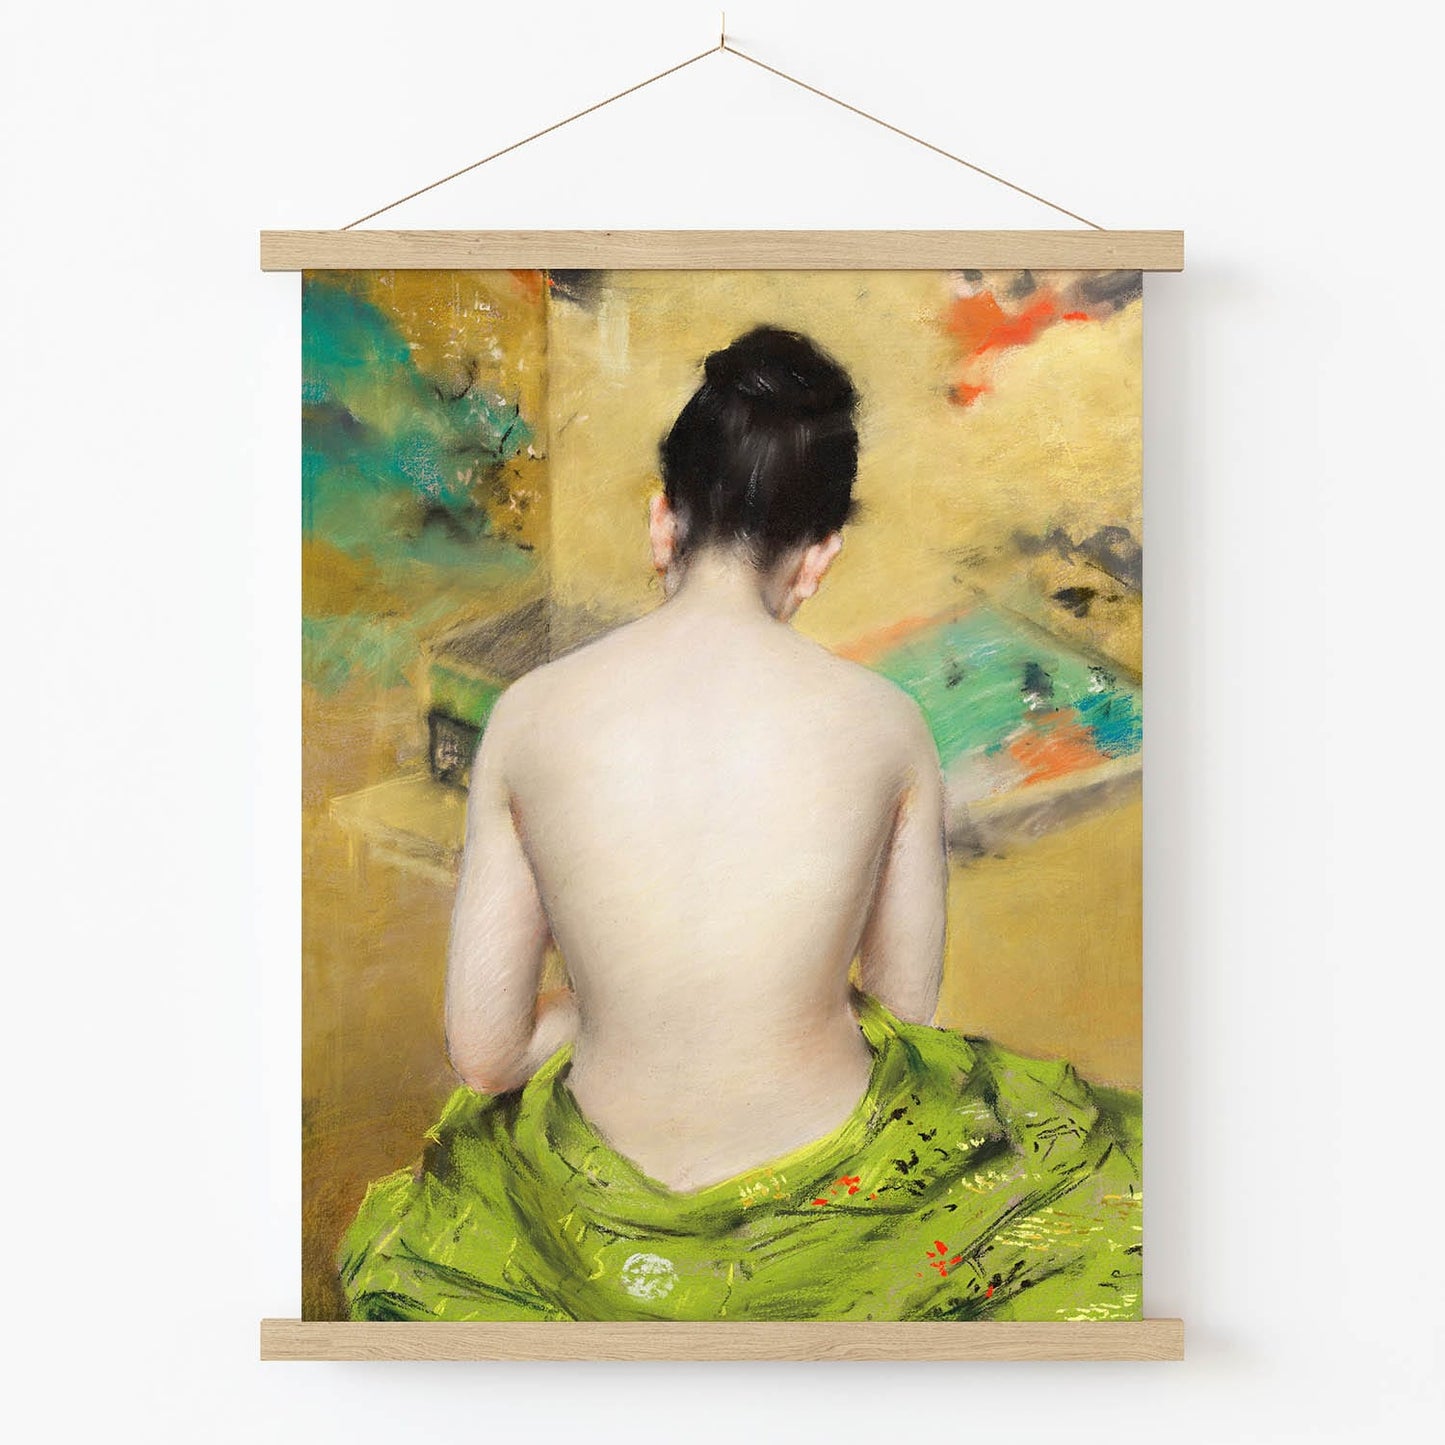 Woman Wrapped in a Green Towel After a Bath Art Print in Wood Hanger Frame on Wall